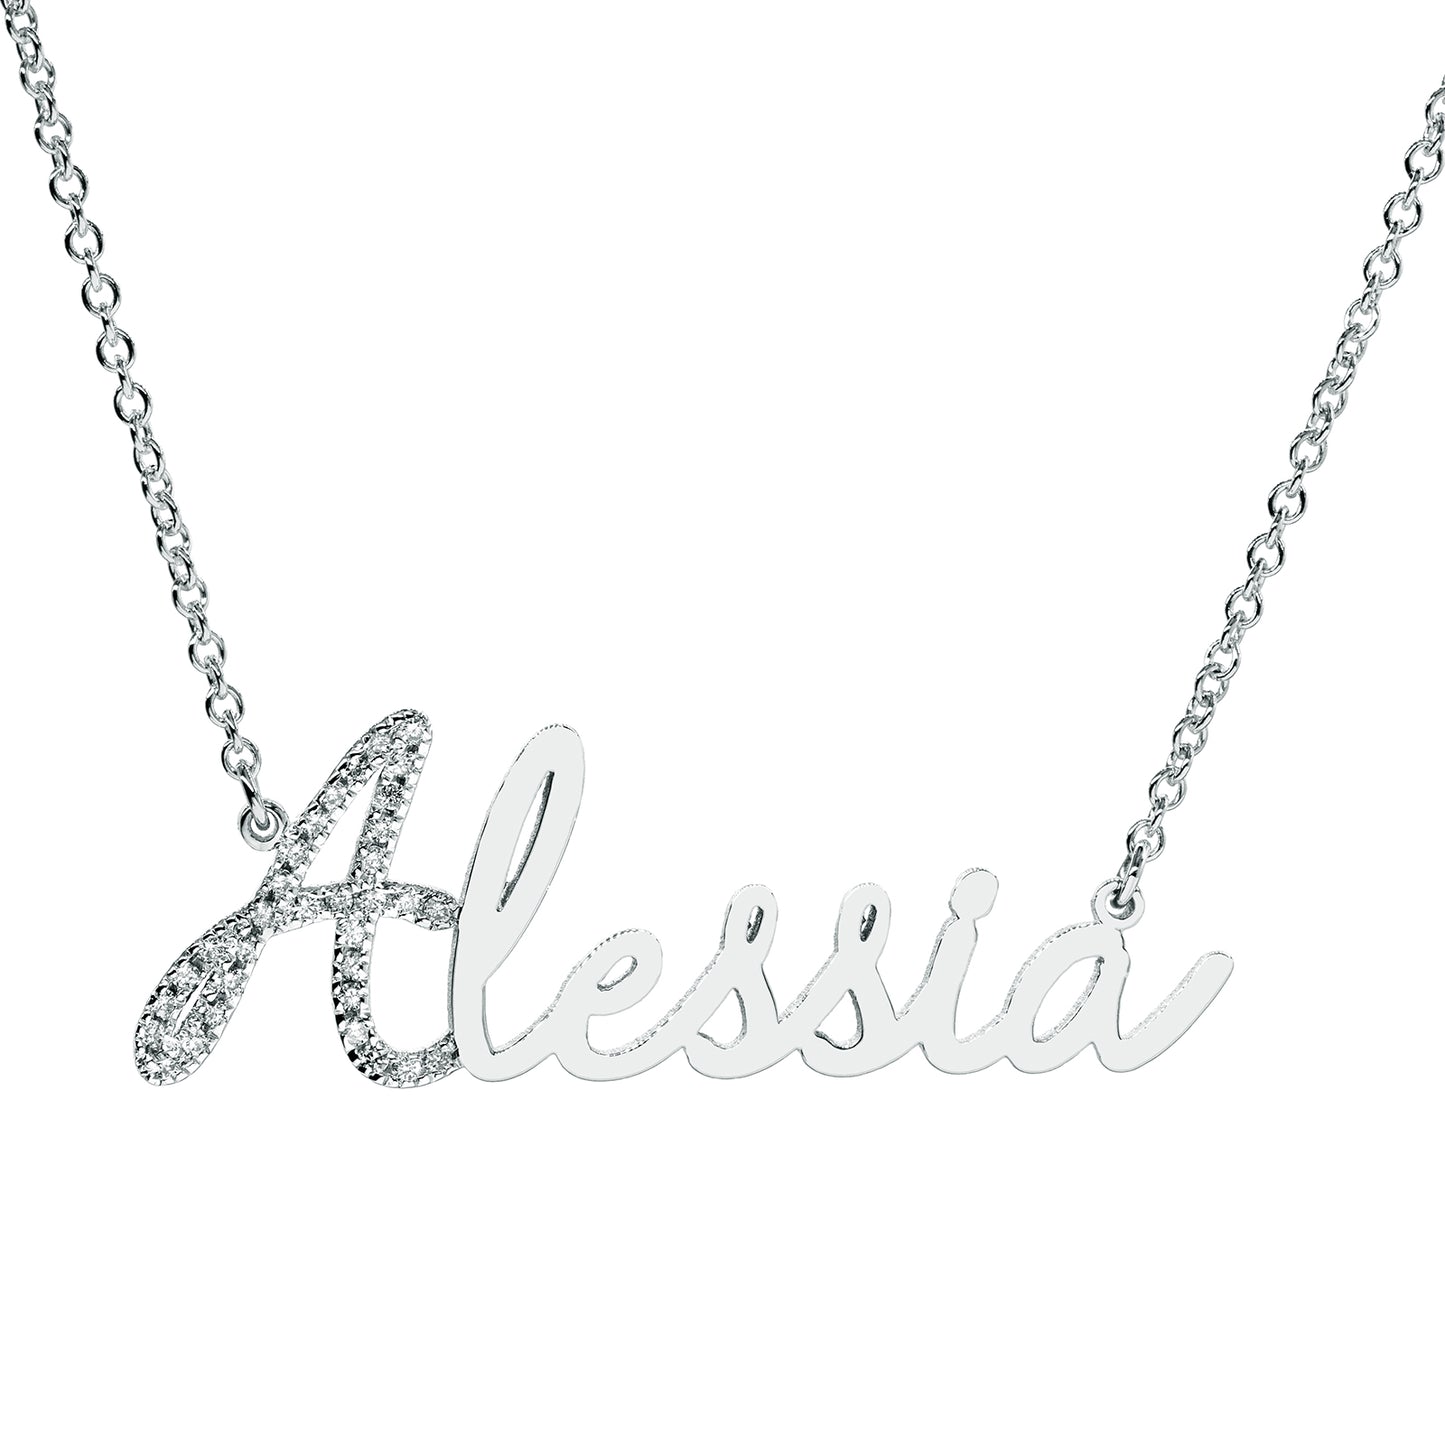 Personalized Name Pendant Necklace with Diamonds an High Polished 14K Gold